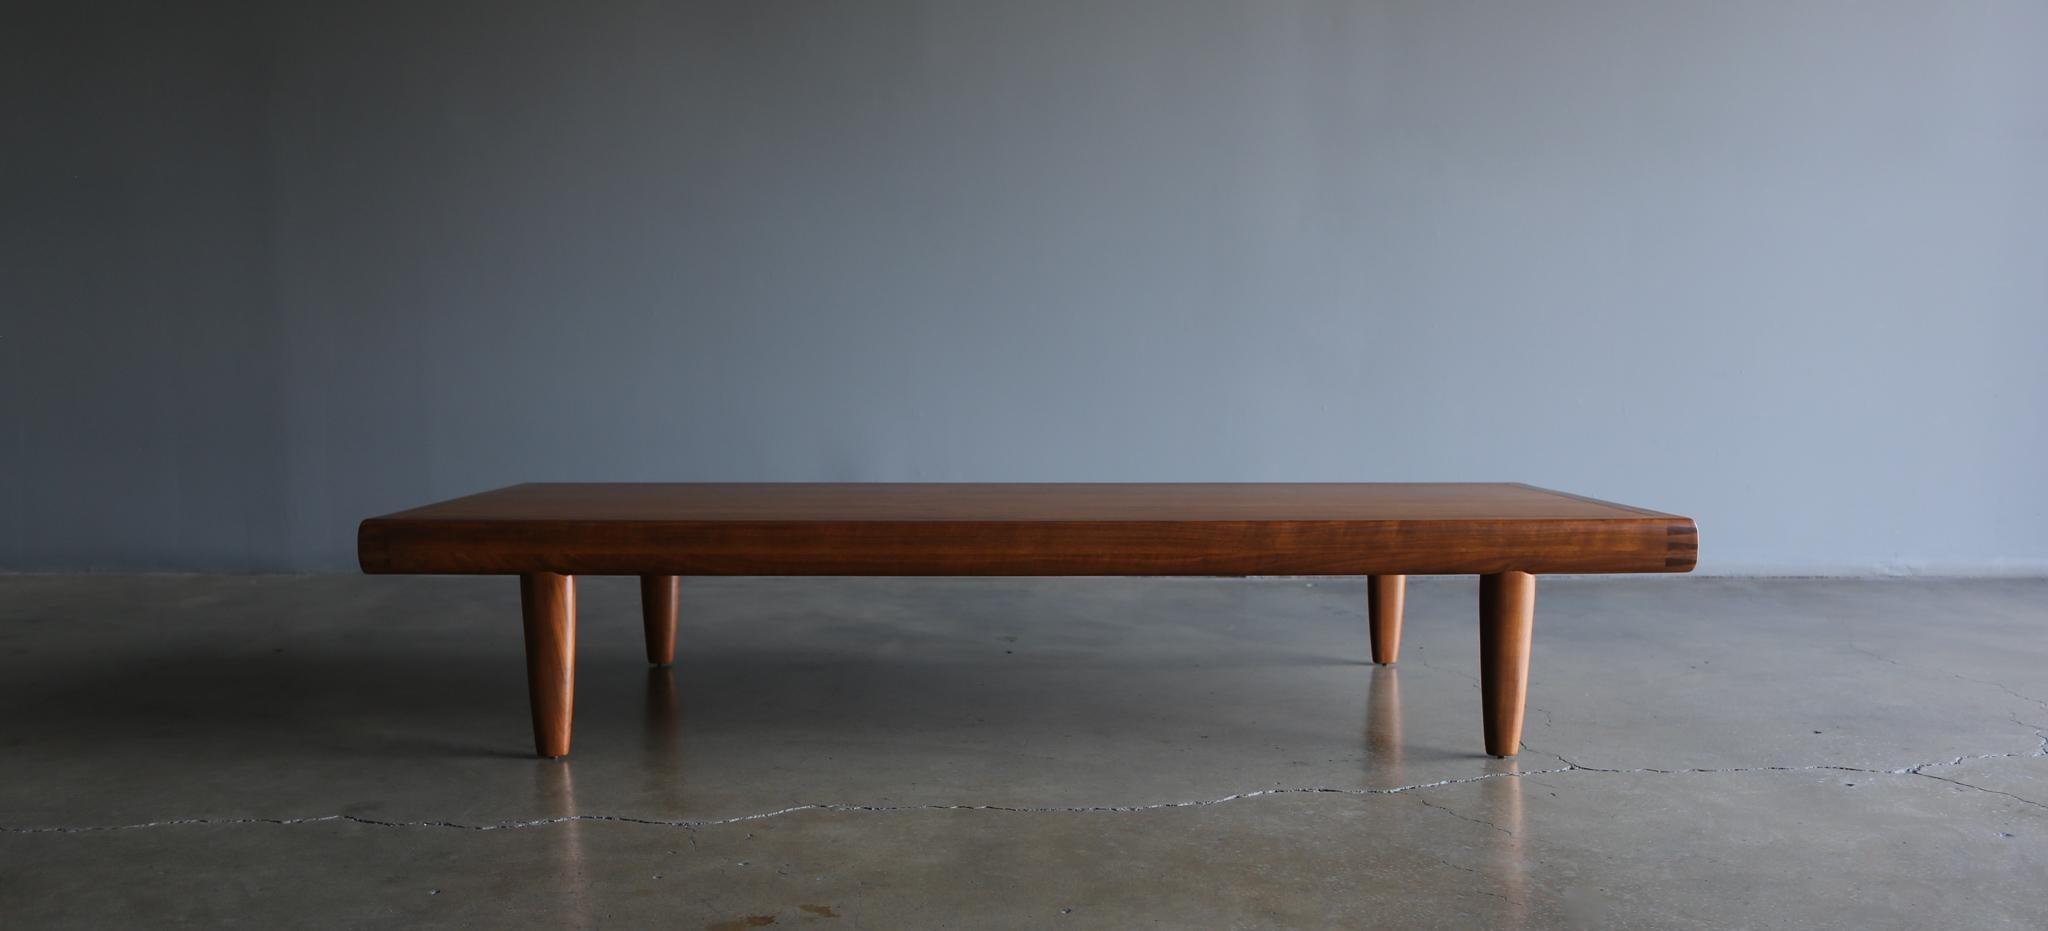 George Nakashima Sundra walnut coffee table for Widdicomb, 1959. This table has been expertly restored.